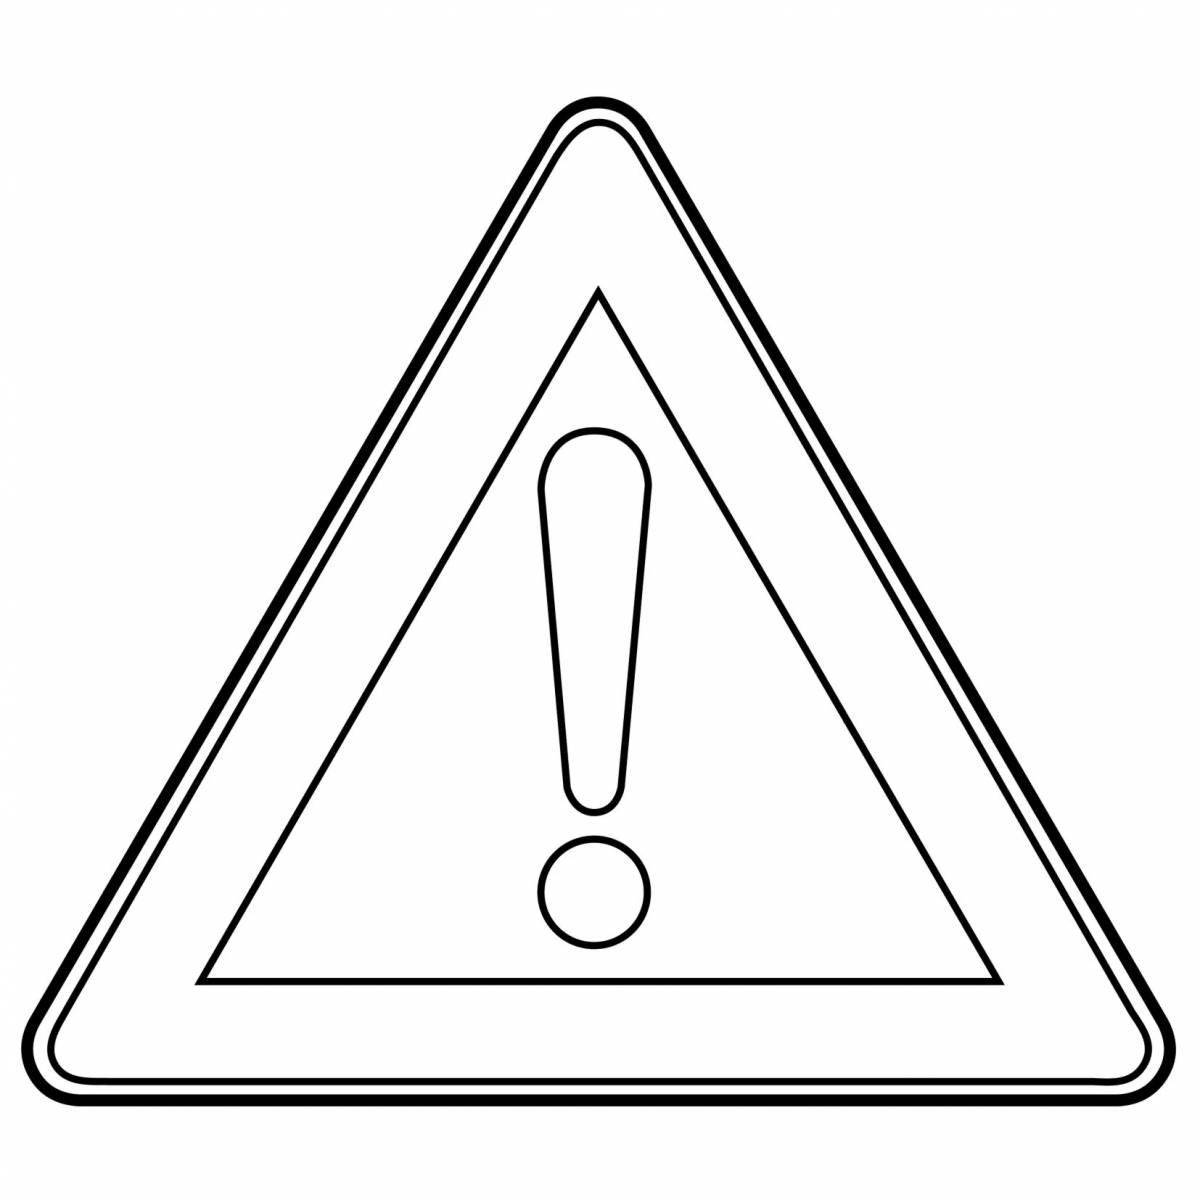 Tempting warning sign coloring page